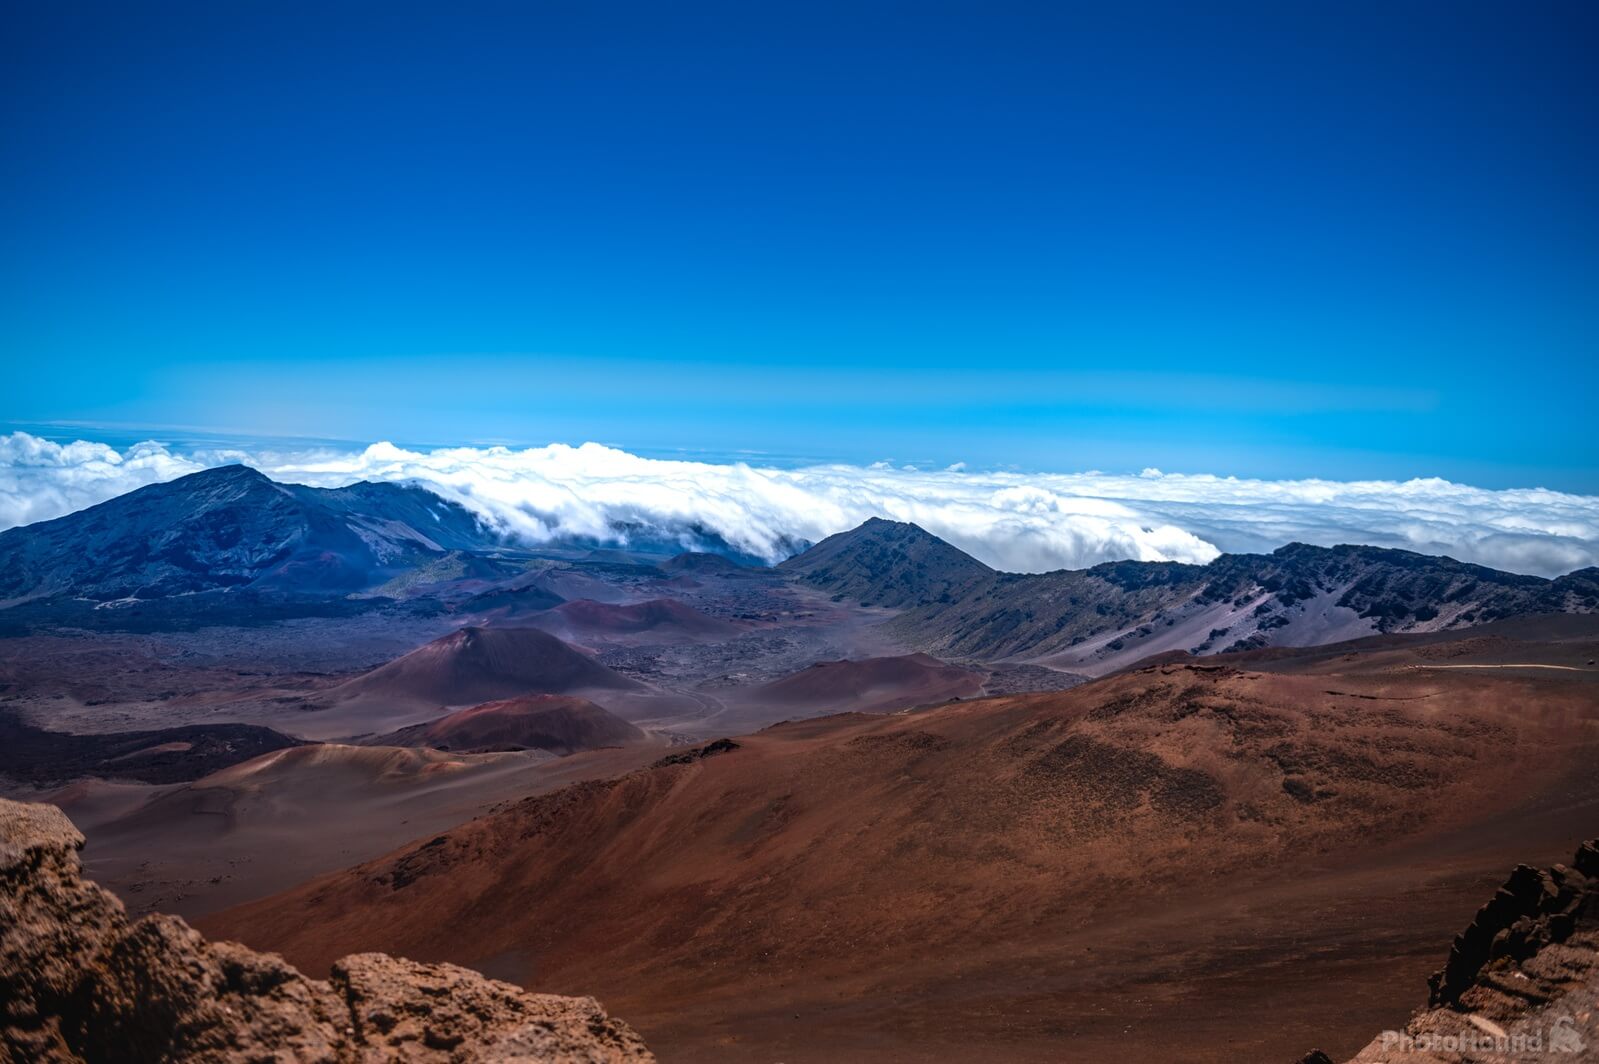 Image of Haleakala National Park Crater, Maui by Ray Graves